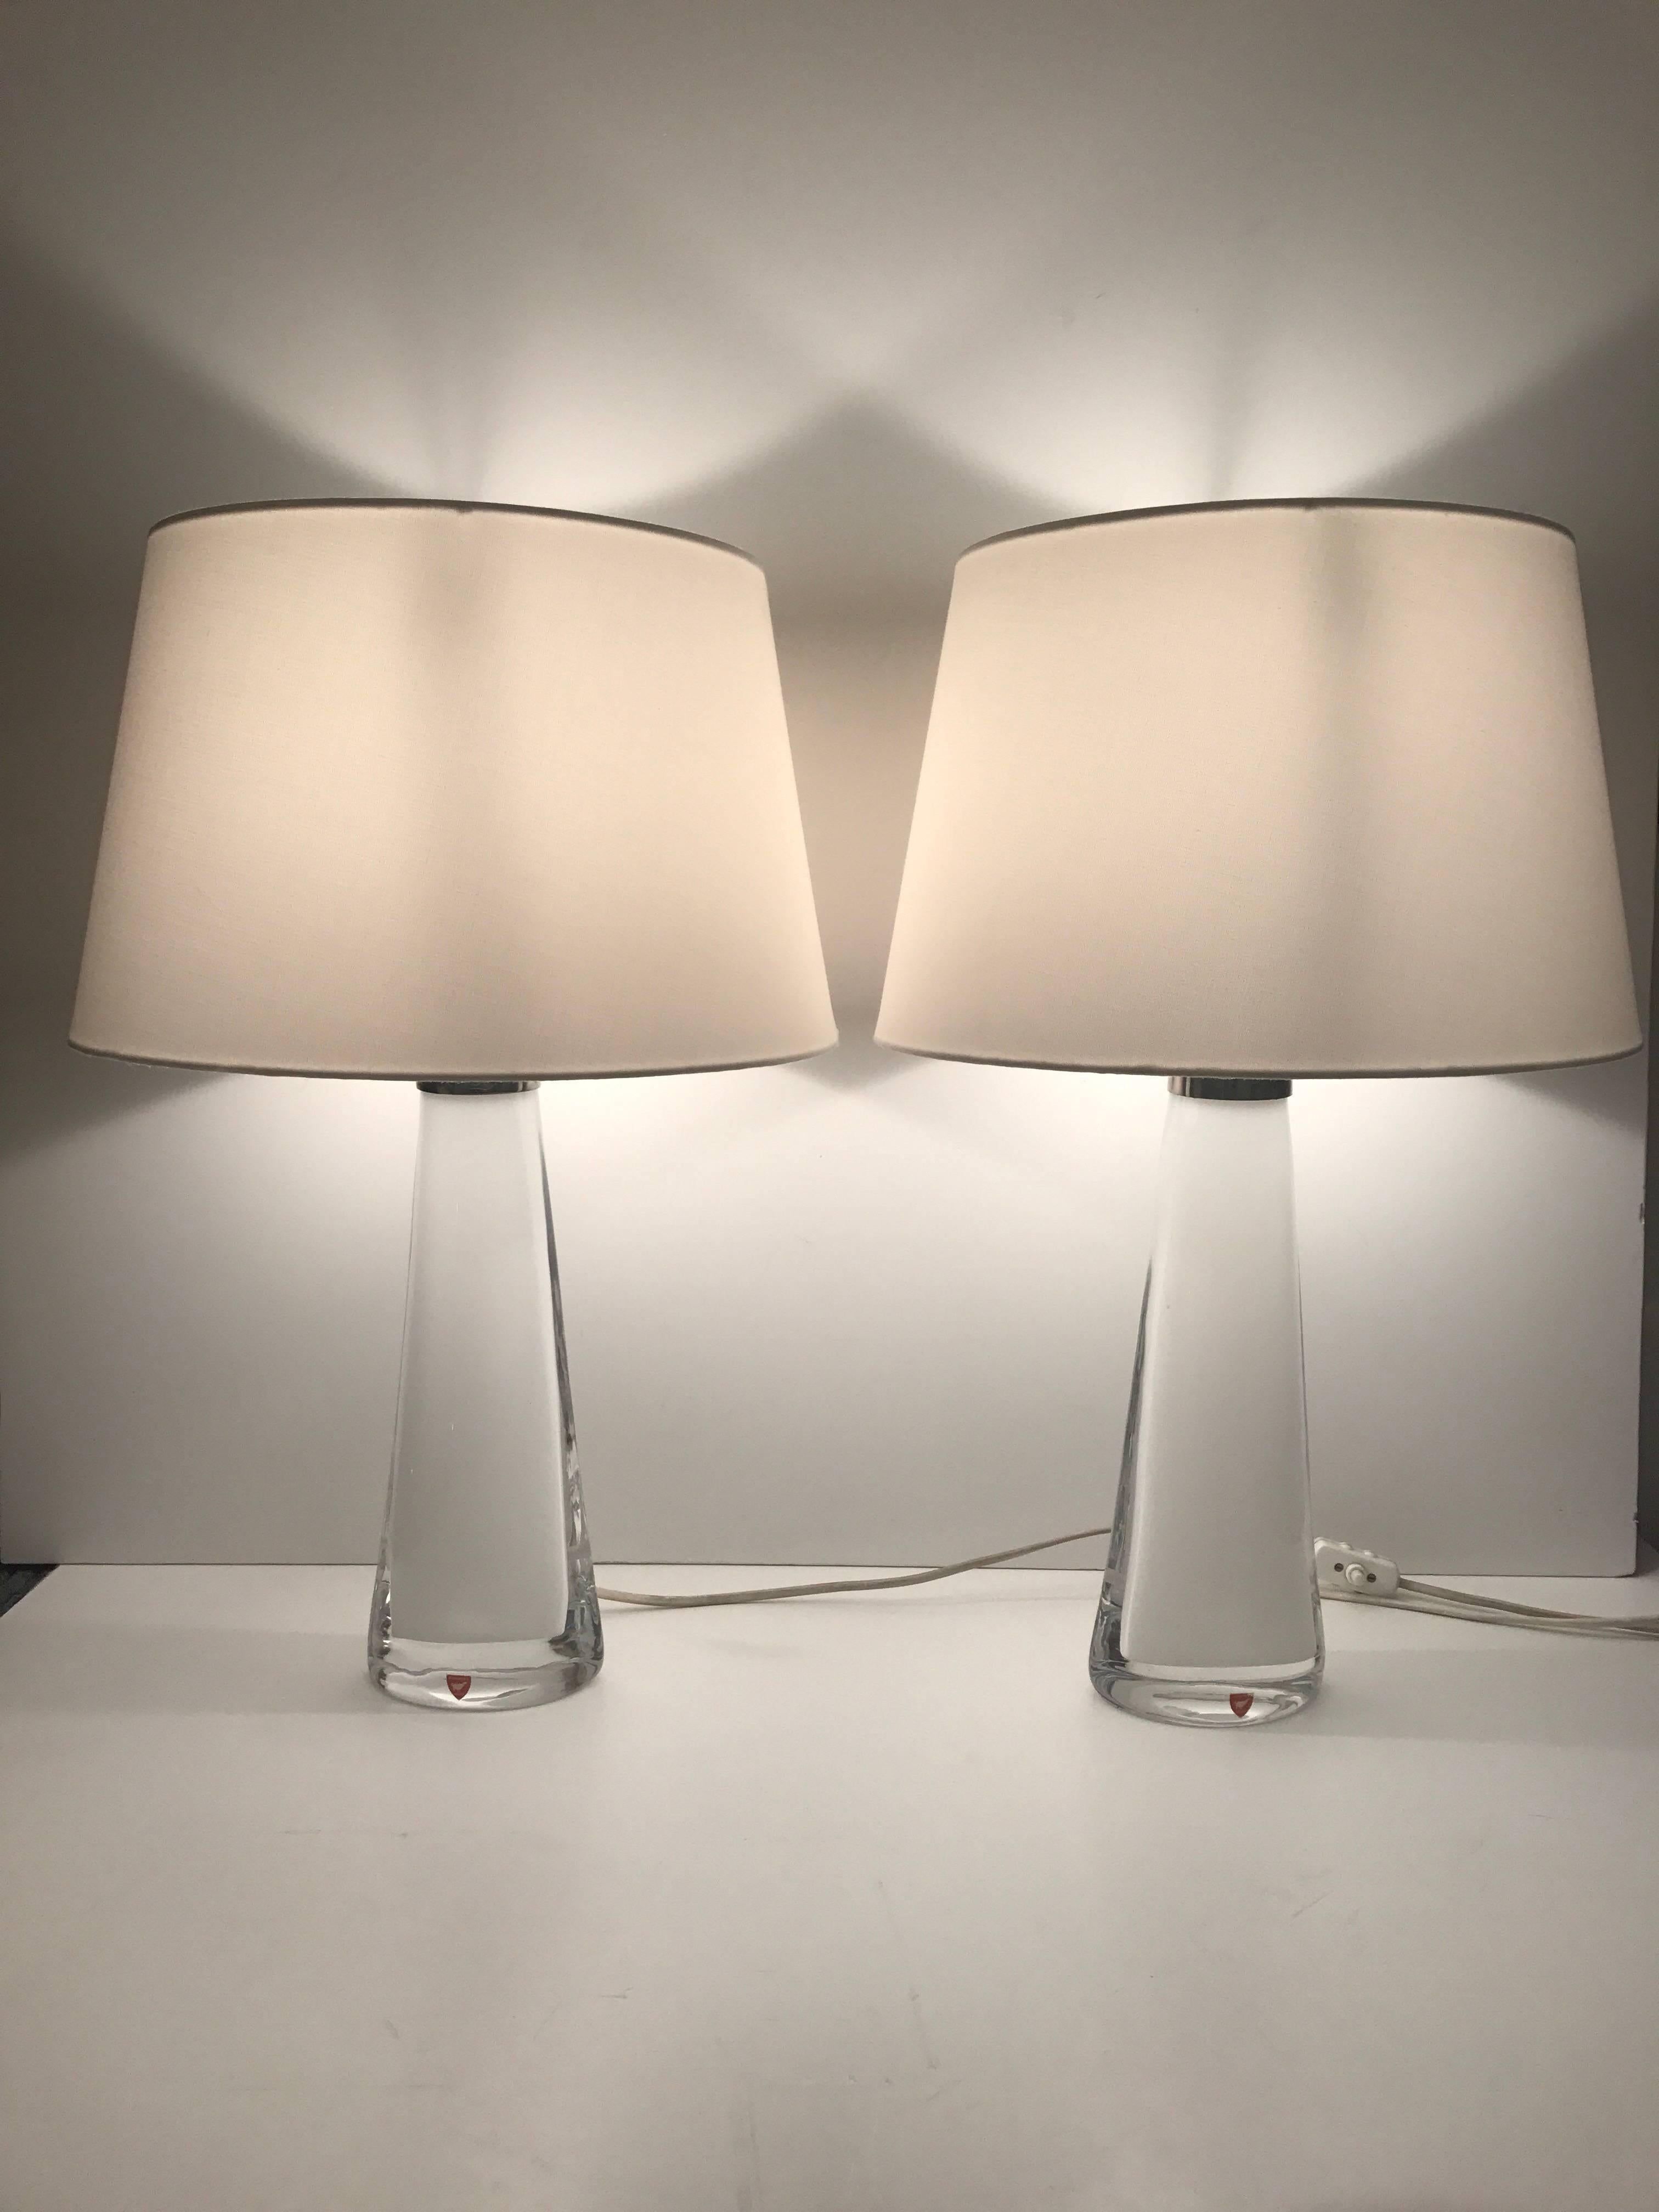 Pair of Swedish Carl Fagerlund white glass table lamps.
A beautiful pair designed by Carl Fagerlund for Orrefors. The lamps are in a fantastic condition without any chips or cracks. The height including the shade is 52 cm and the diameter of the